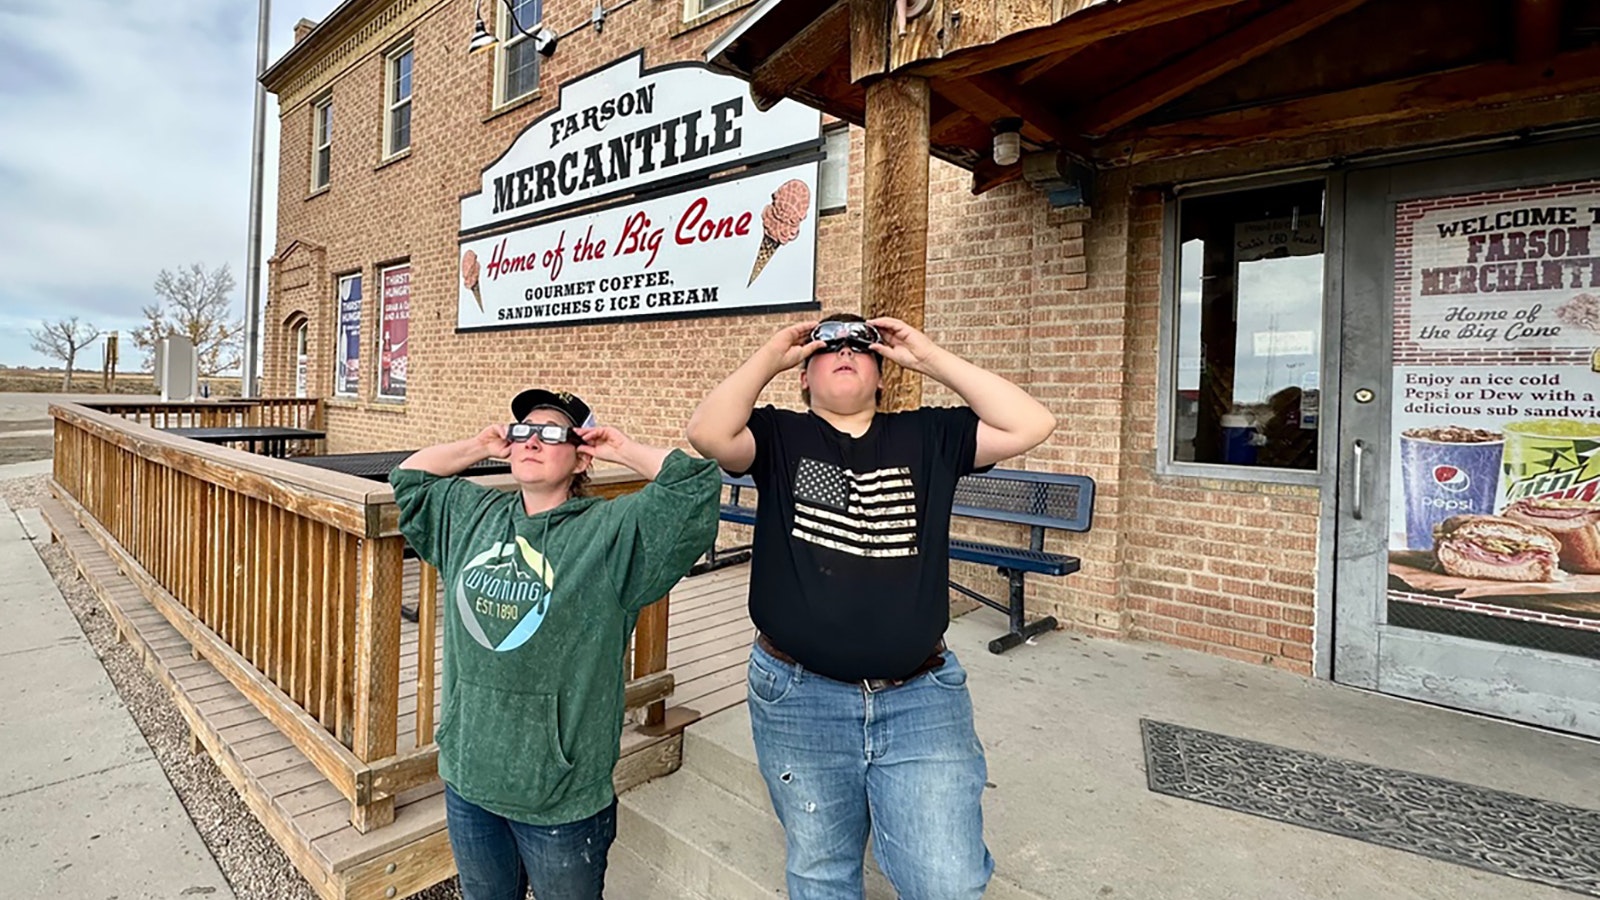 Alli Roghair and Bryce Campbell watch Saturday's eclipse from in front of the Farson Mercantile.